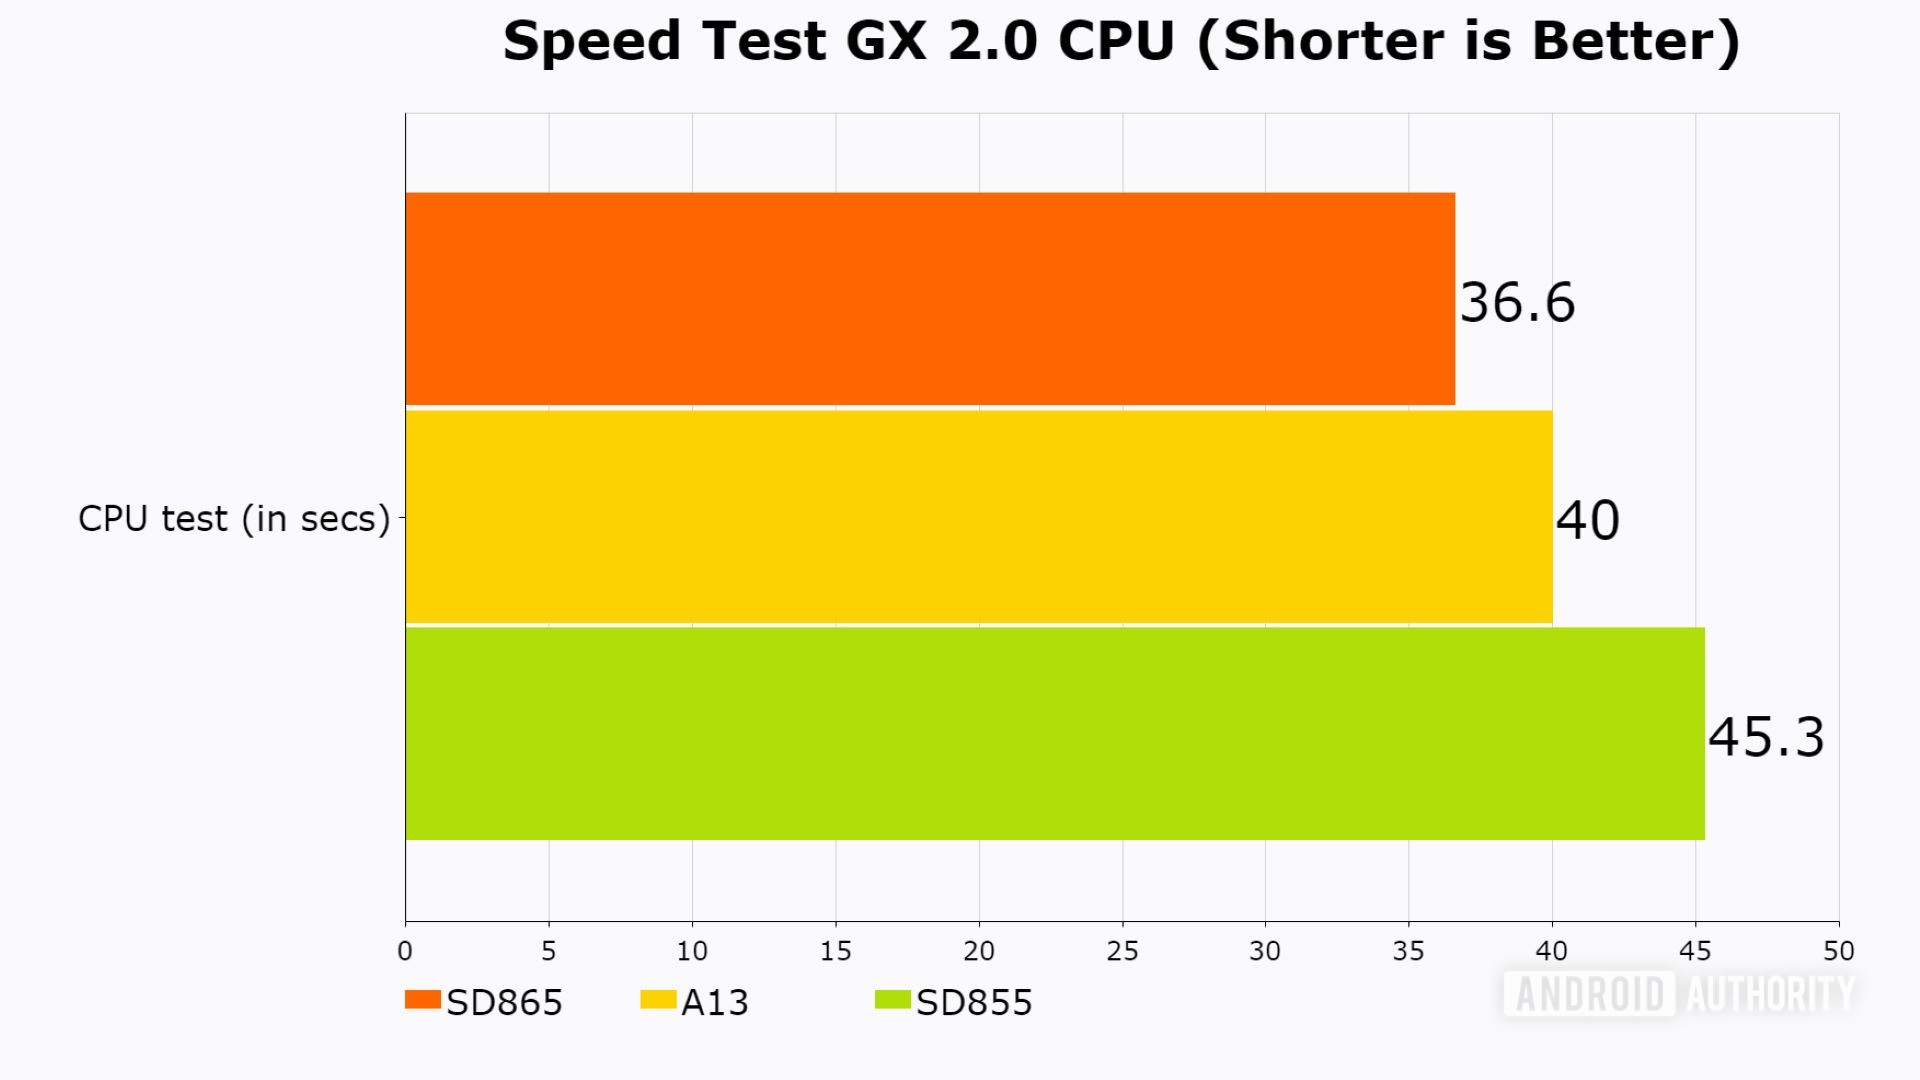 Speed Test GX 2.0 results for Snapdragon 865